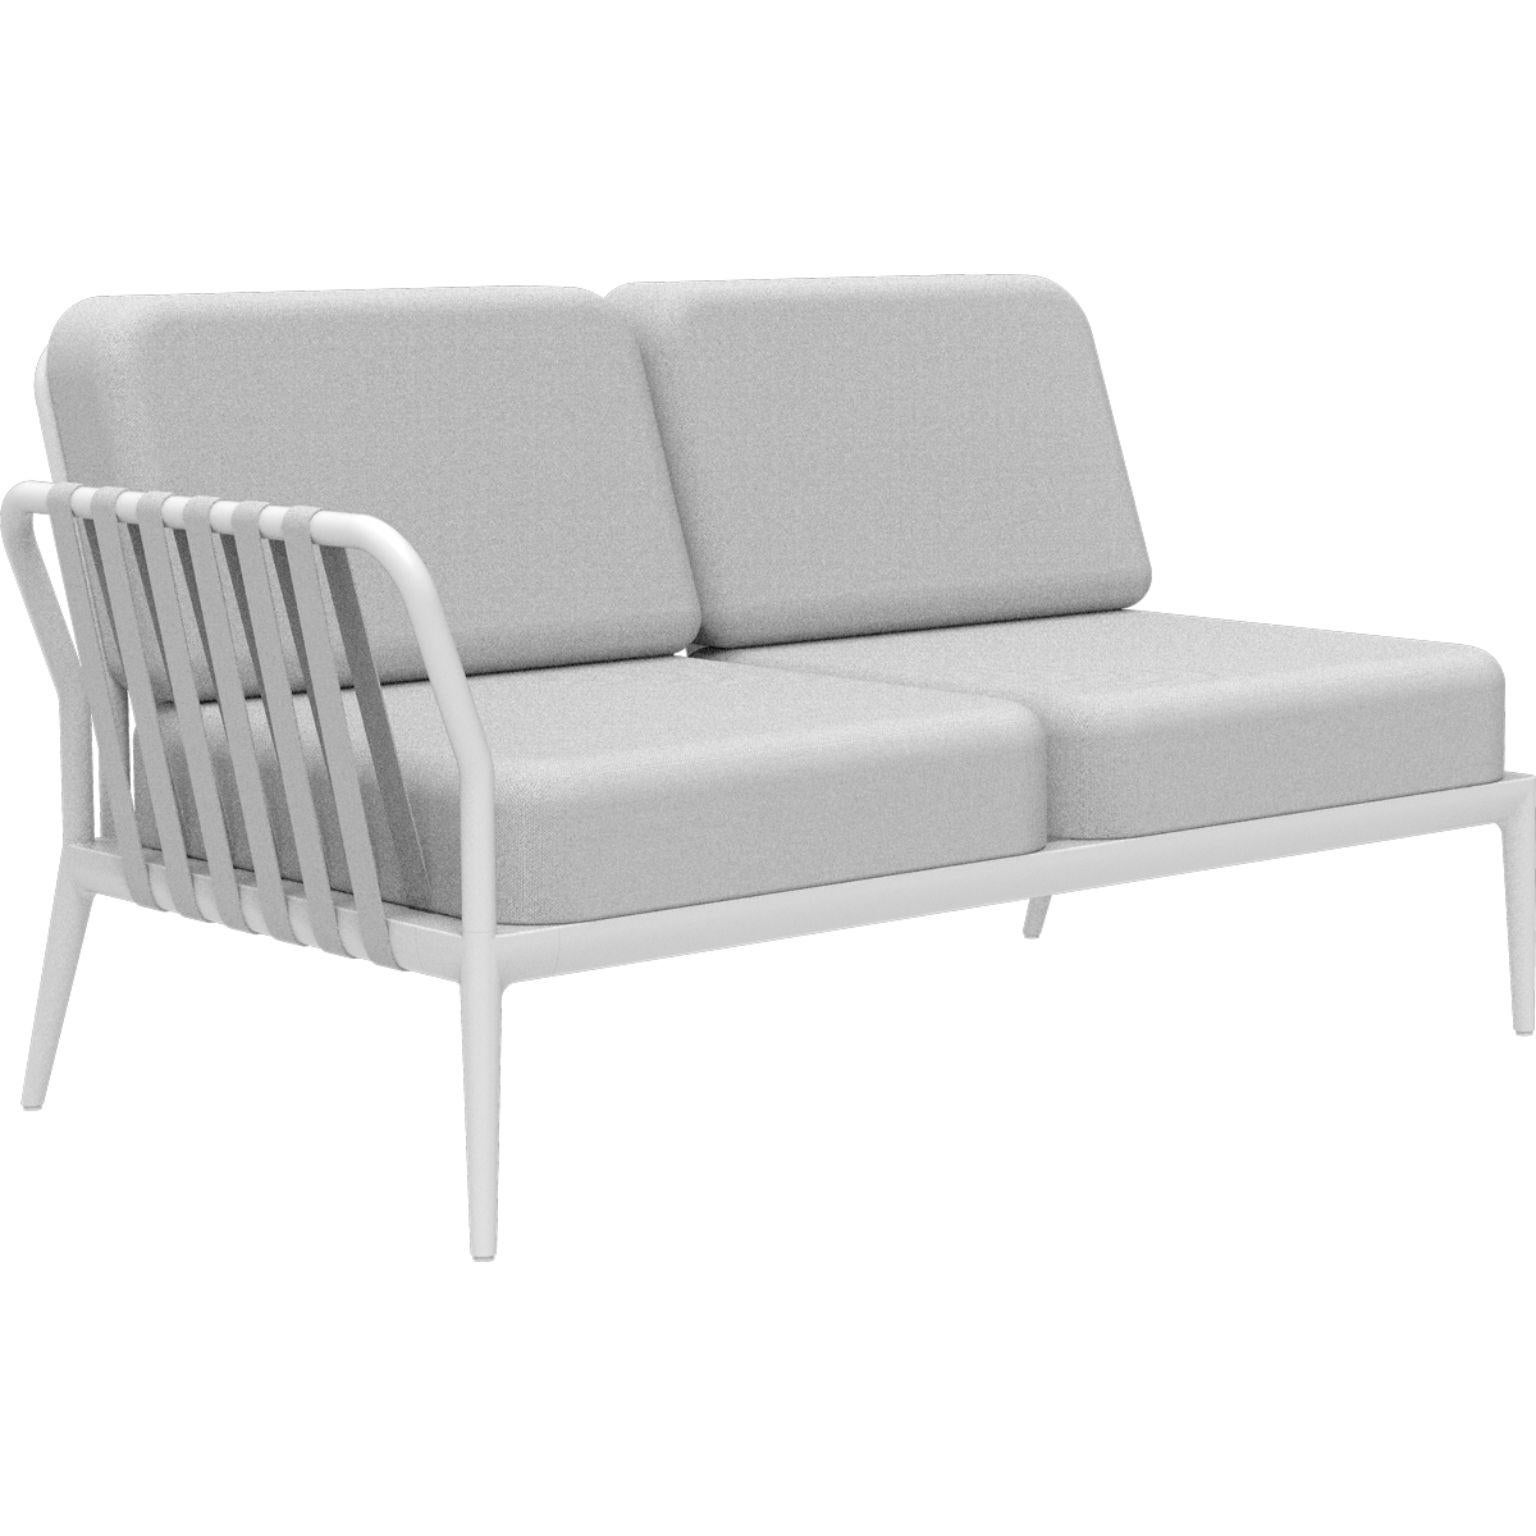 Ribbons white double right modular sofa by MOWEE
Dimensions: D83 x W148 x H81 cm (seat height 42 cm).
Material: Aluminium and upholstery.
Weight: 29 kg
Also available in different colors and finishes. 

An unmistakable collection for its